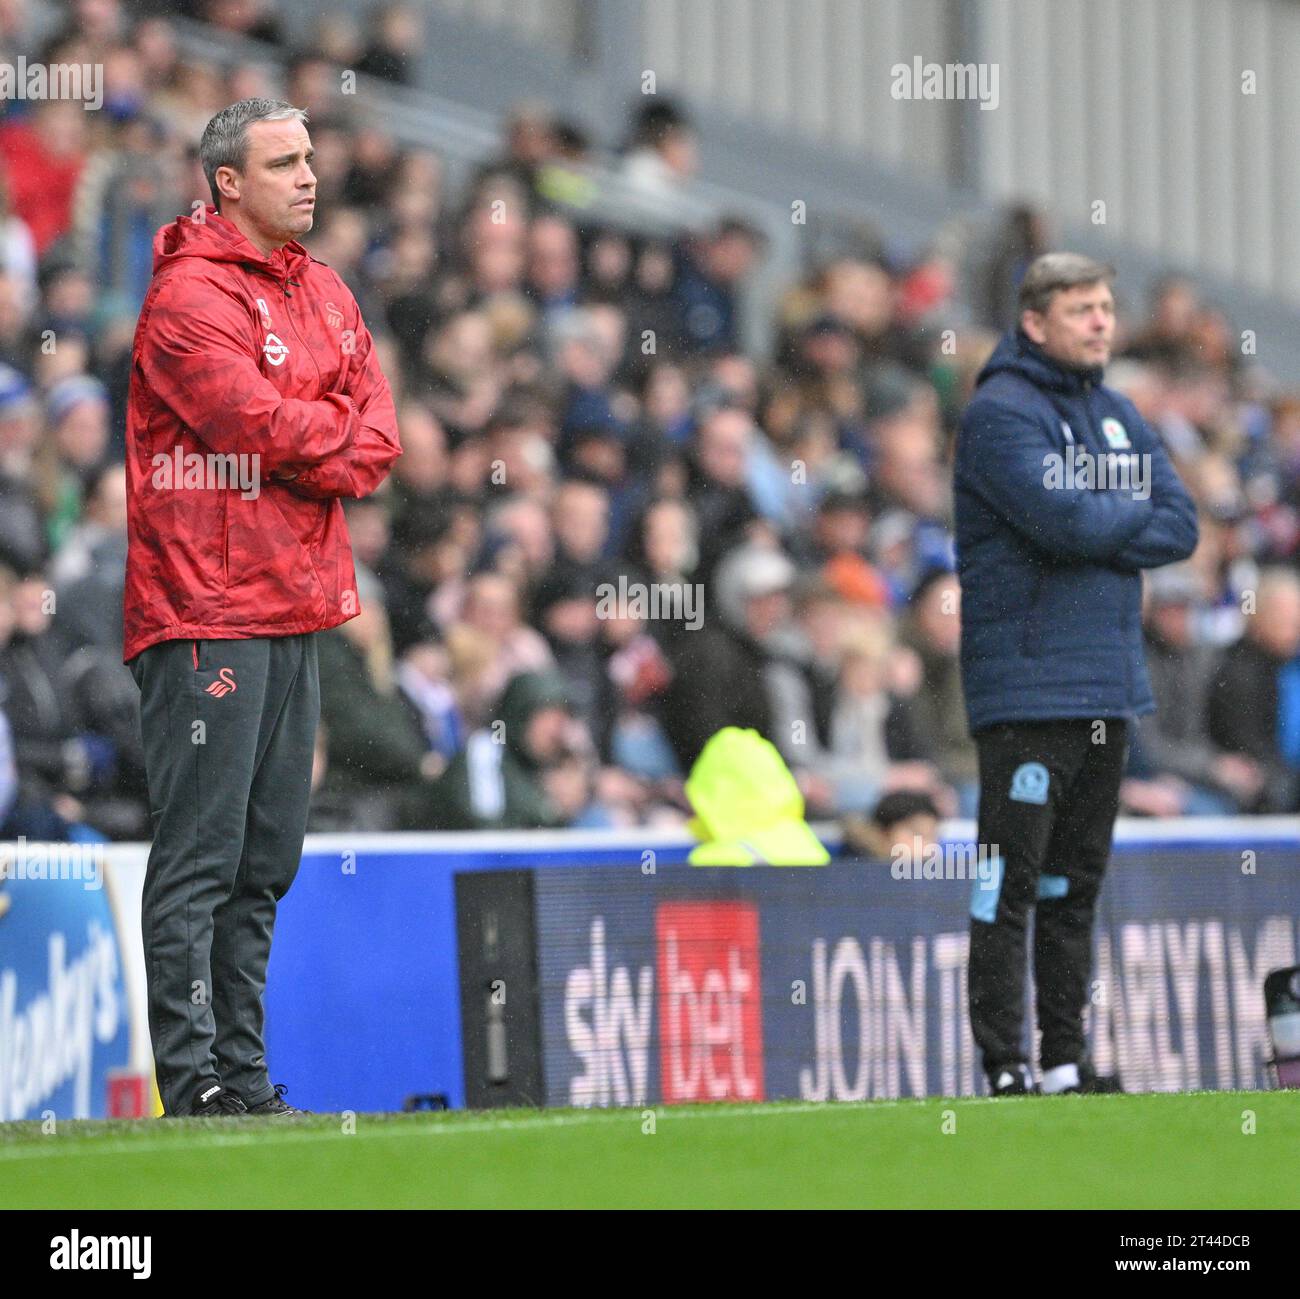 Blackburn, UK. 28th Oct, 2023. Michael Duff manager of Swansea City Association Football Club watches on the match, during the Sky Bet Championship match Blackburn Rovers vs Swansea City at Ewood Park, Blackburn, United Kingdom, 28th October 2023 (Photo by Cody Froggatt/News Images) in Blackburn, United Kingdom on 10/28/2023. (Photo by Cody Froggatt/News Images/Sipa USA) Credit: Sipa USA/Alamy Live News Stock Photo